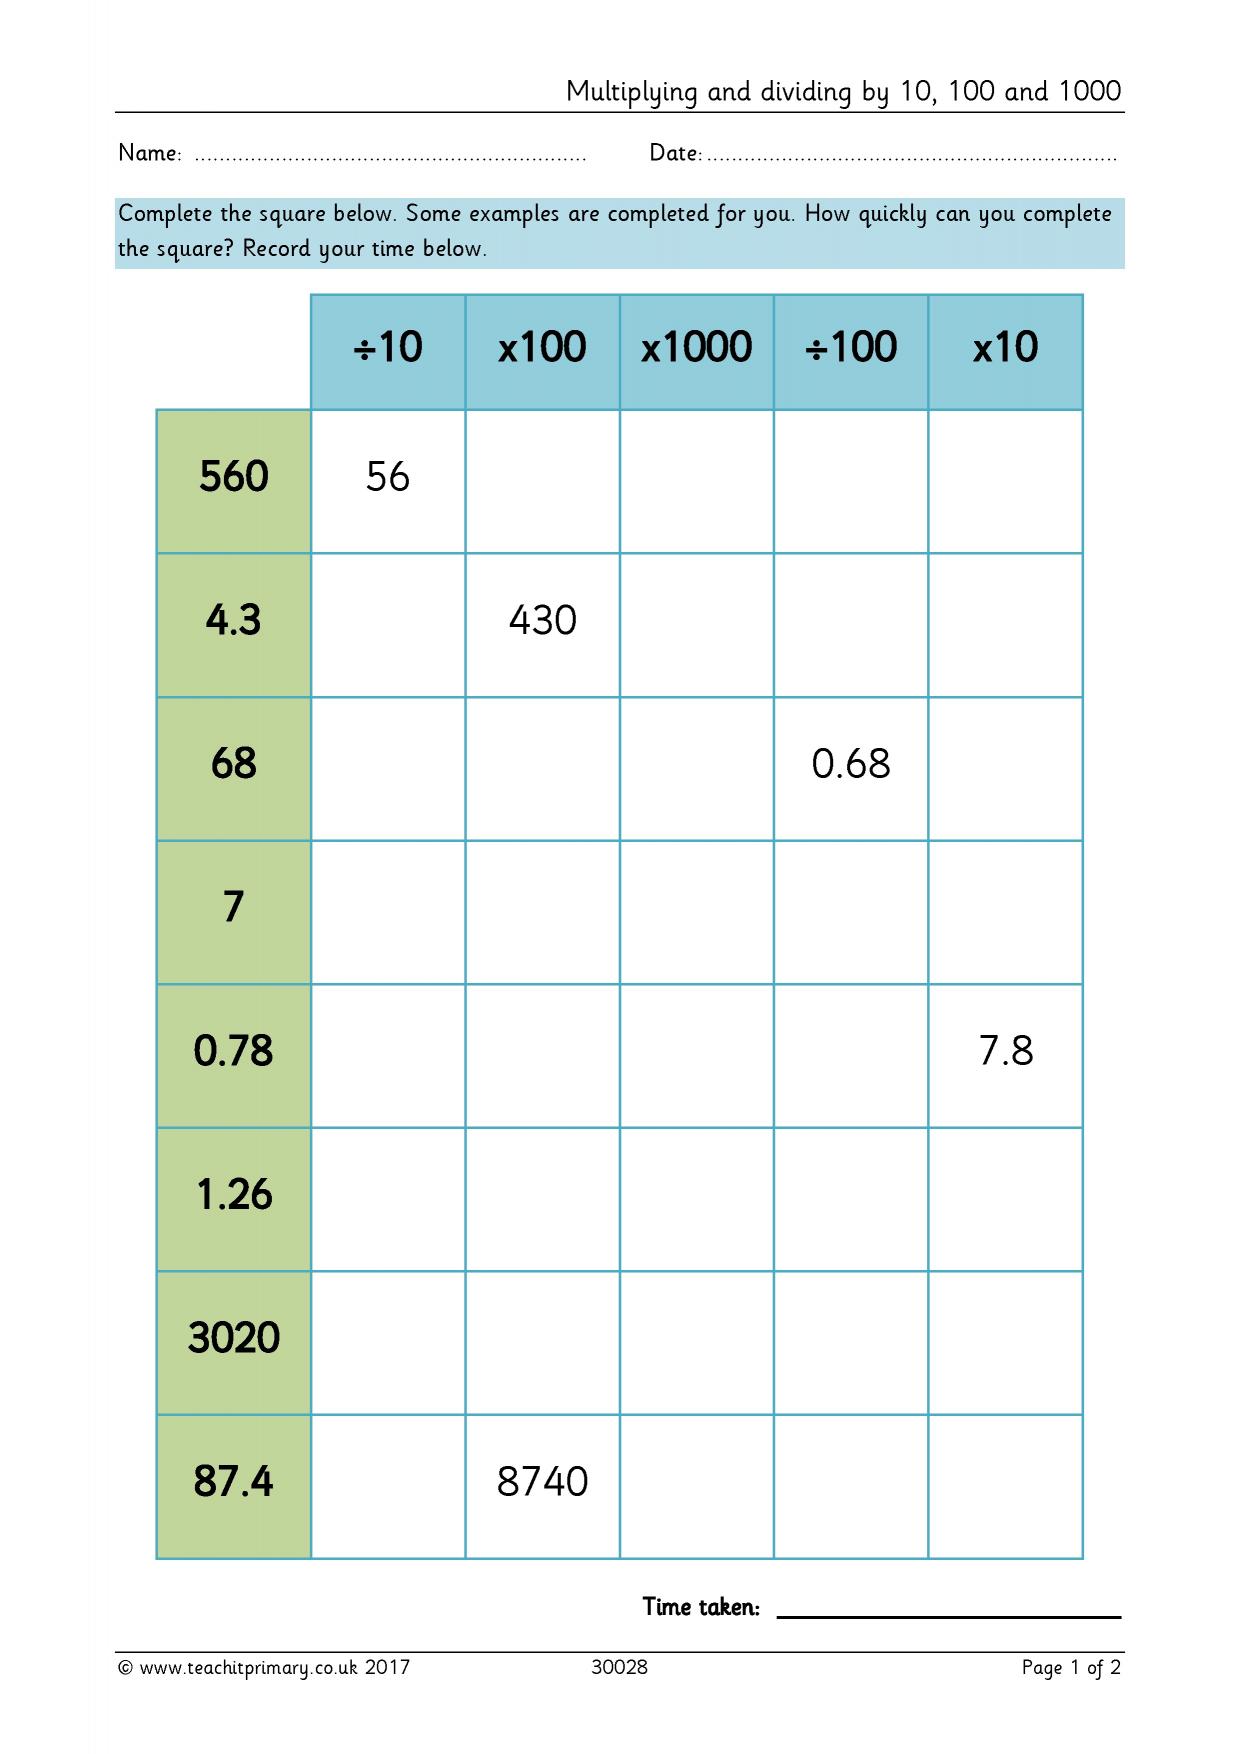 multiplying-and-dividing-by-10-100-and-1000-ks2-place-value-teachit